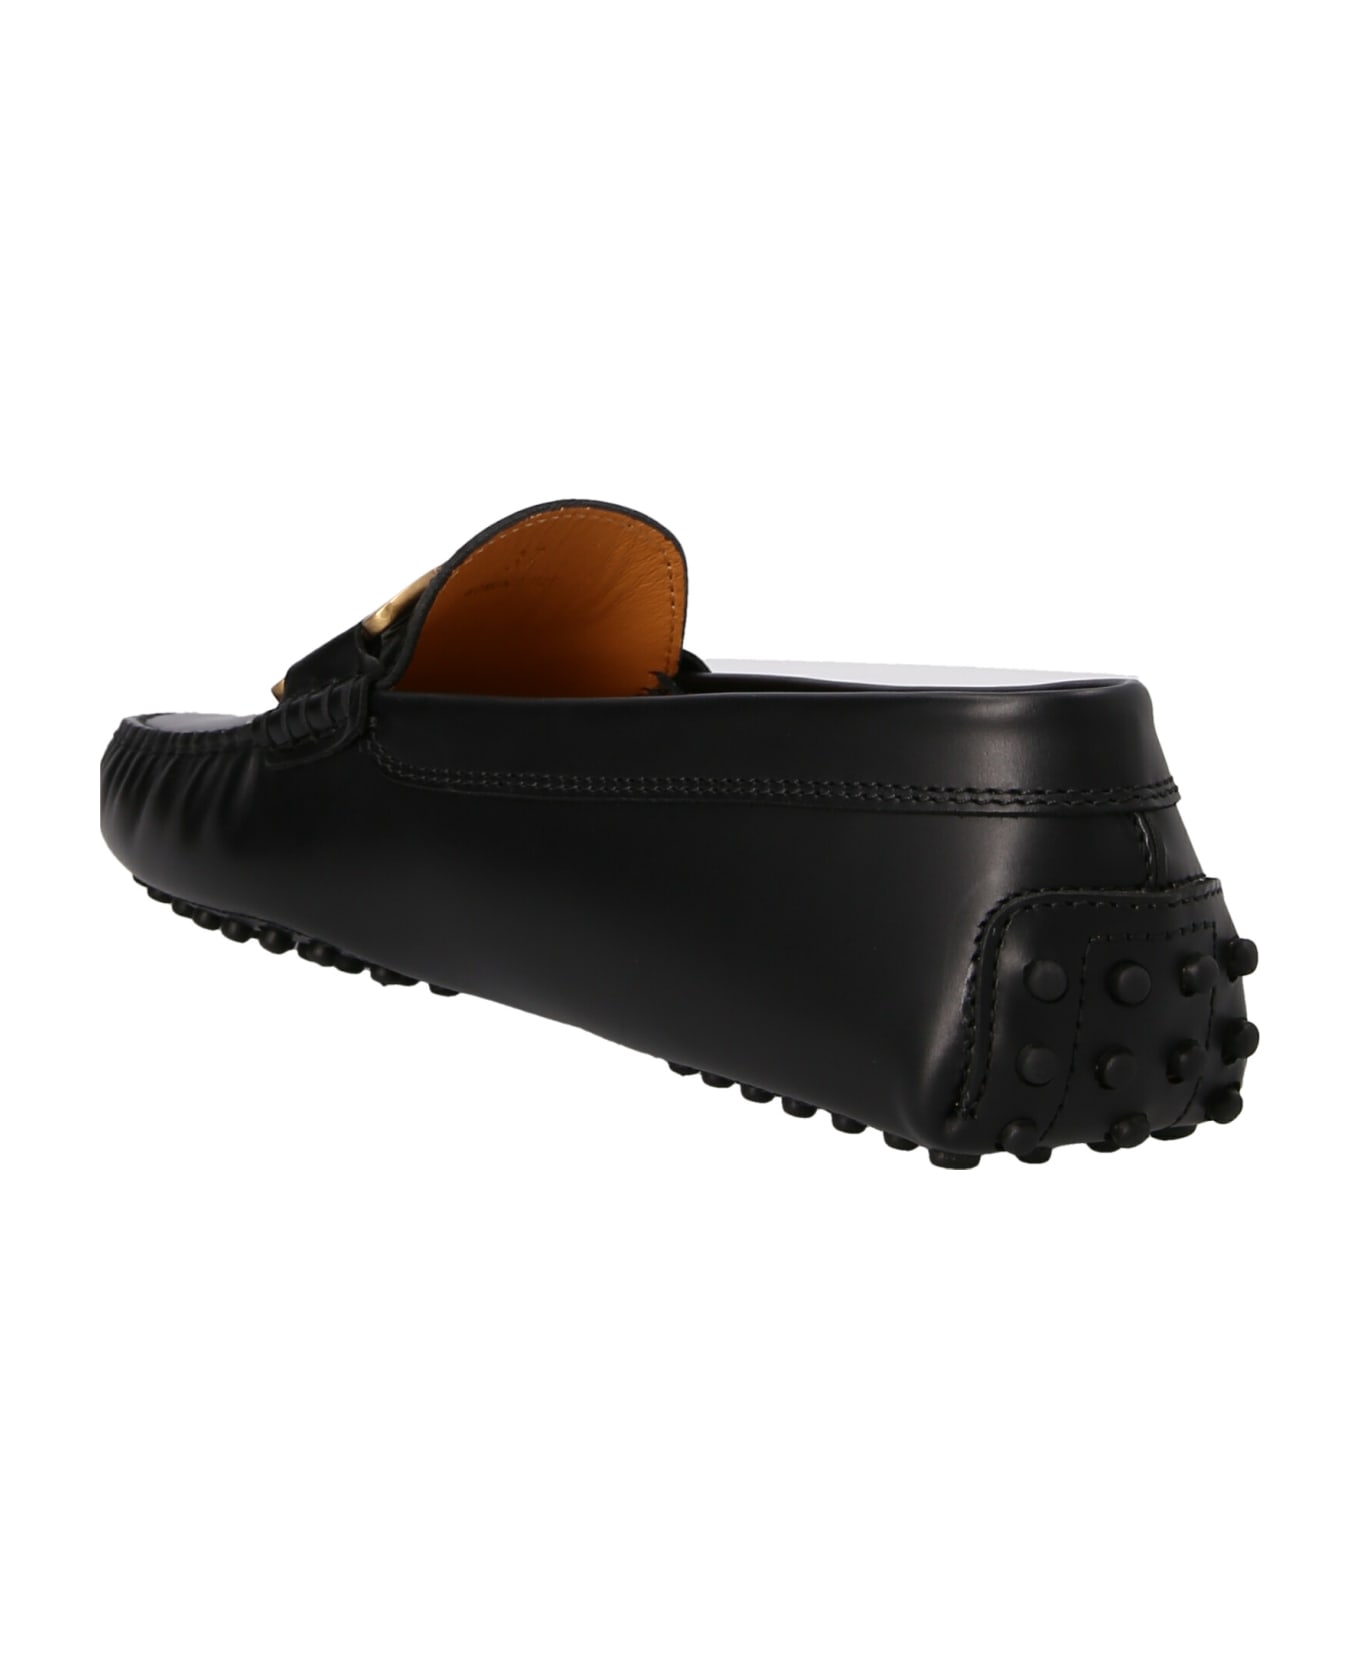 Tod's Kate Leather Loafers - Black